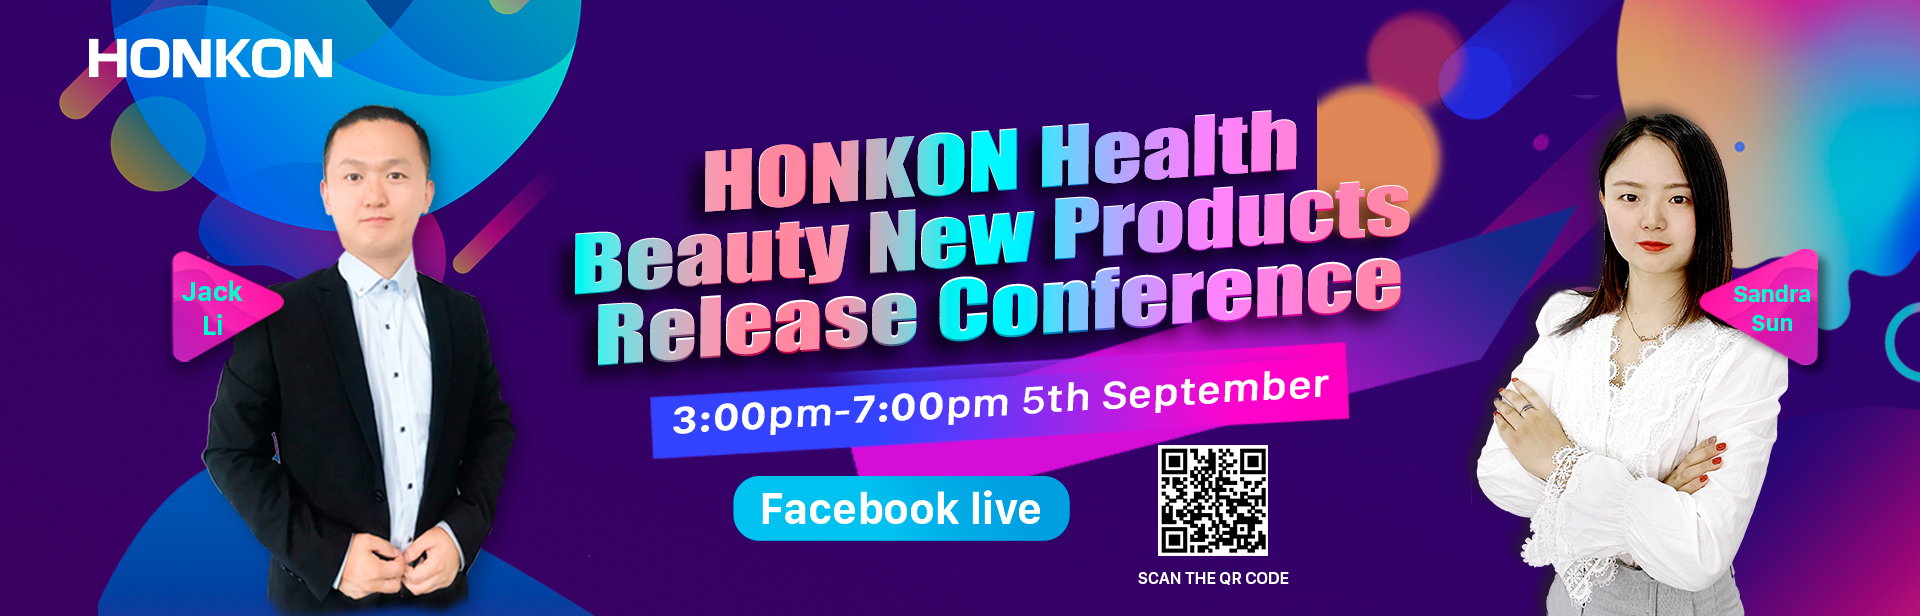 HONKON Health & Beauty New Products Release Conference4